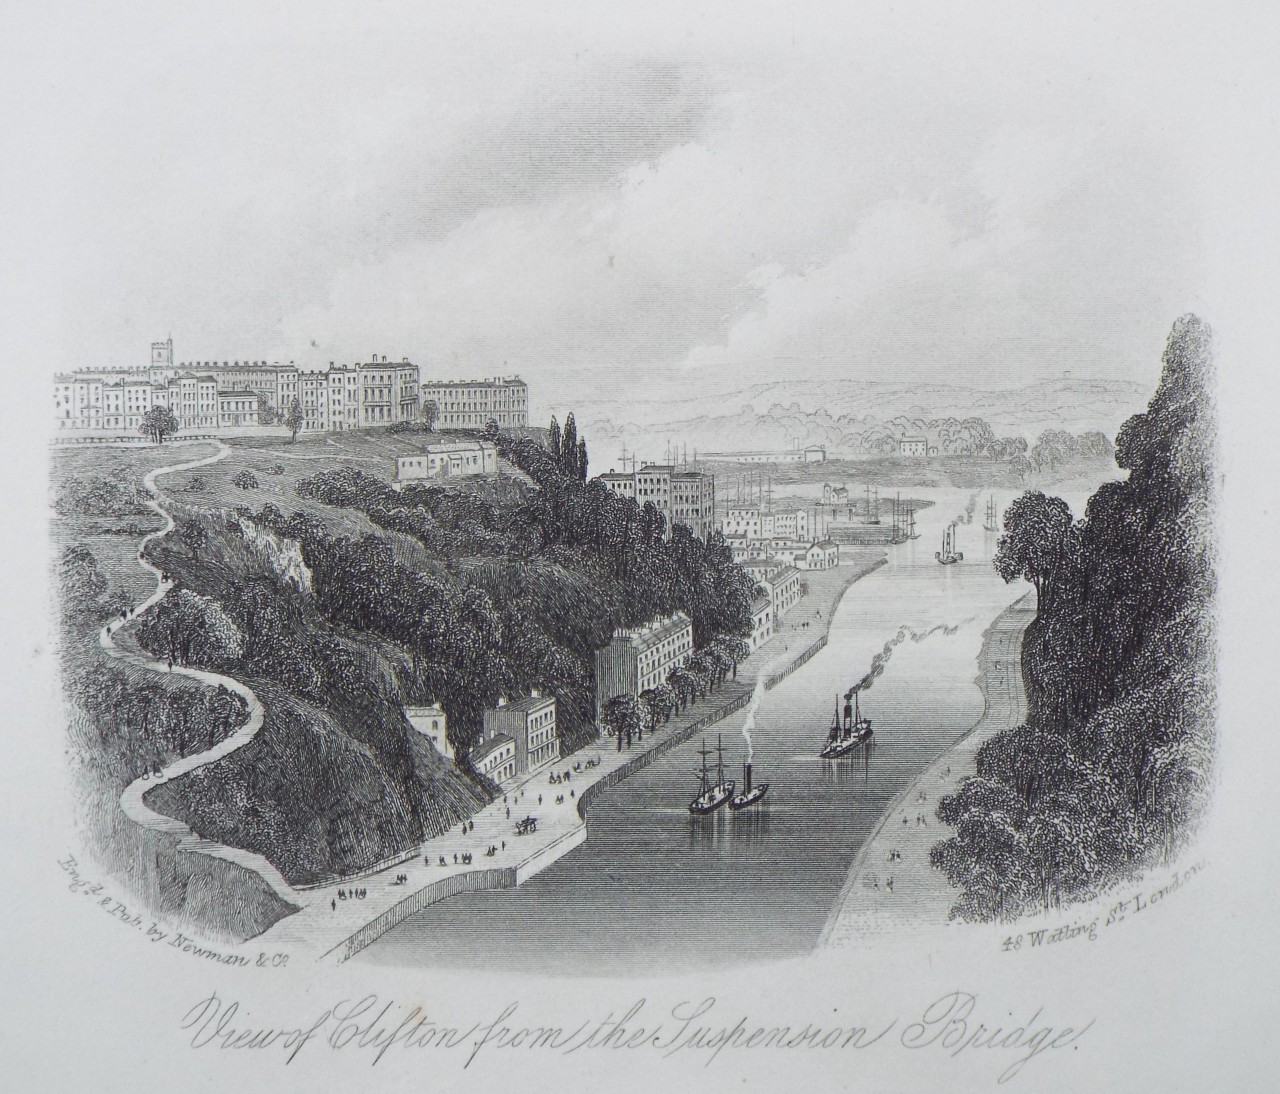 Steel Vignette - View of Clifton, from the Suspension Bridge. - Newman